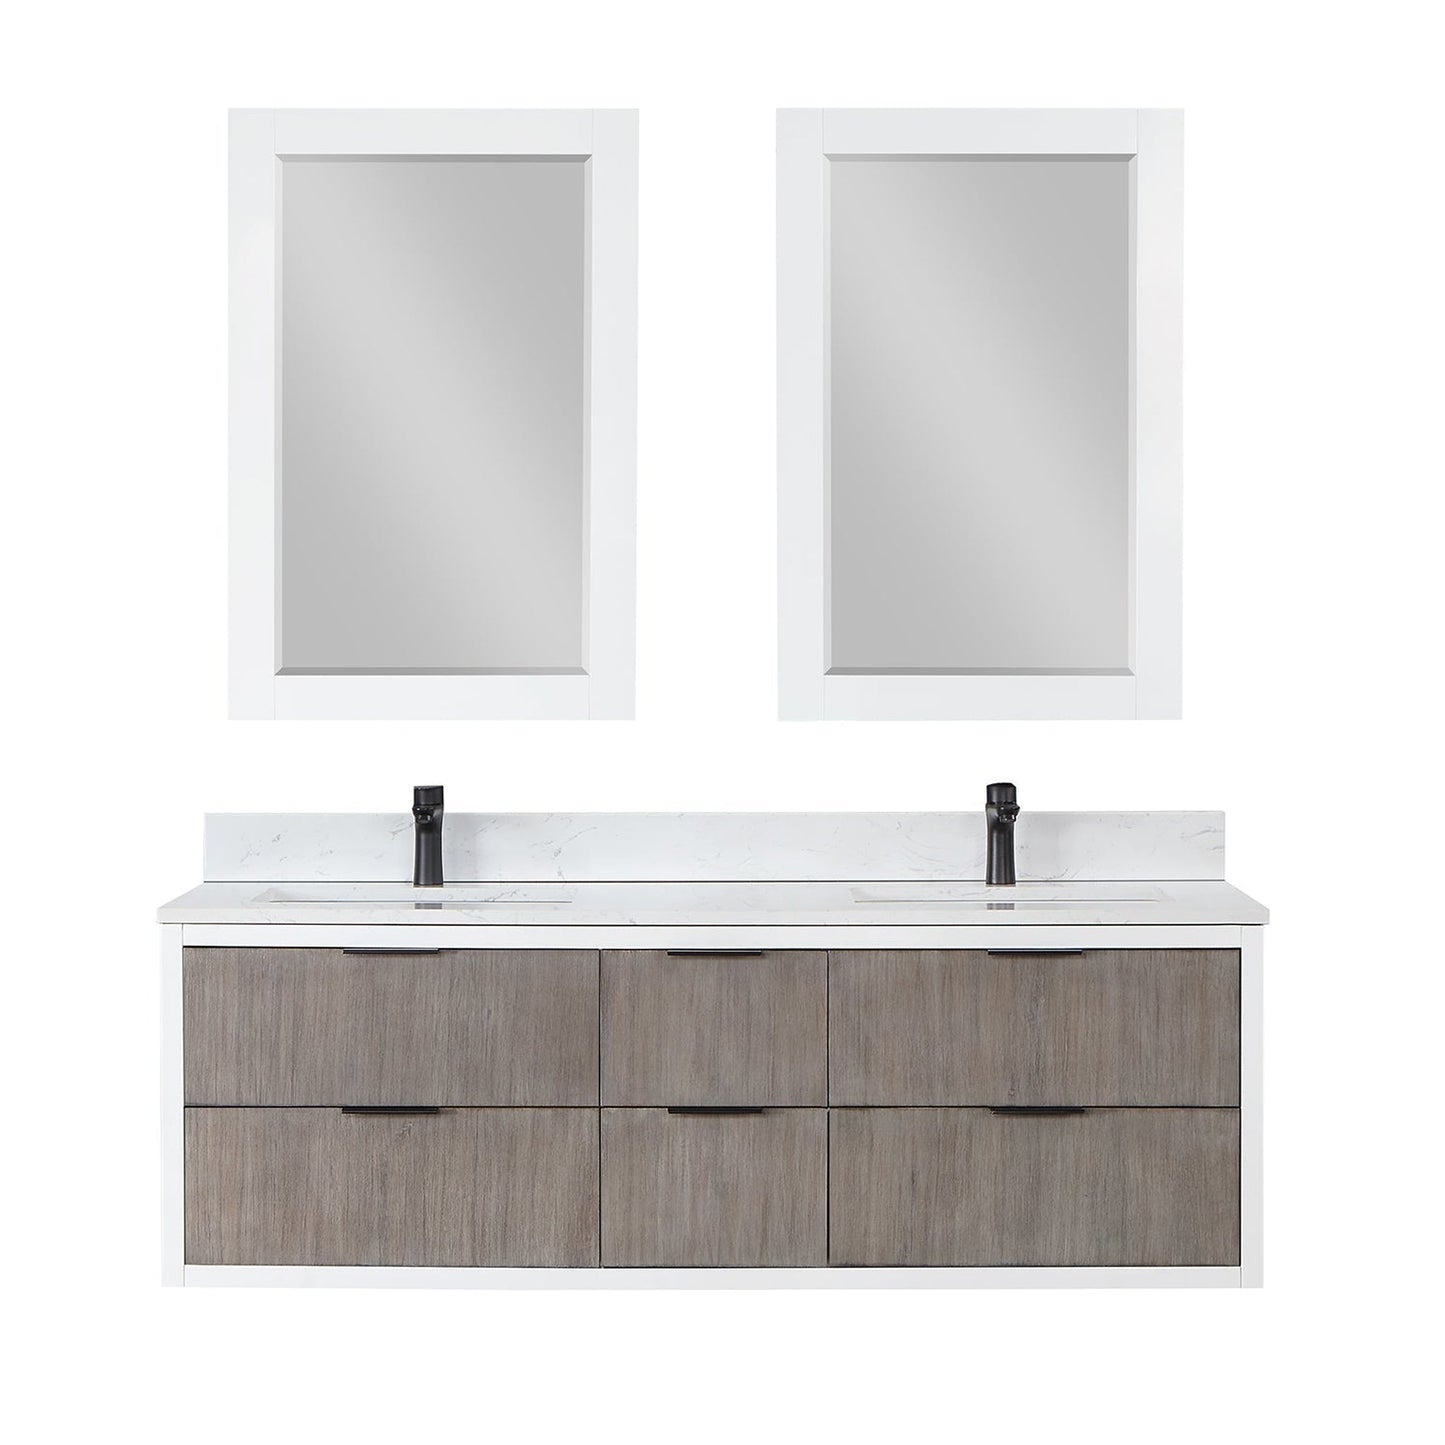 Altair Dione 60" Double Classical Gray Wall-Mounted Bathroom Vanity Set With Mirror, Aosta White Composite Stone Top, Double Rectangular Undermount Ceramic Sinks, Overflow, and Backsplash